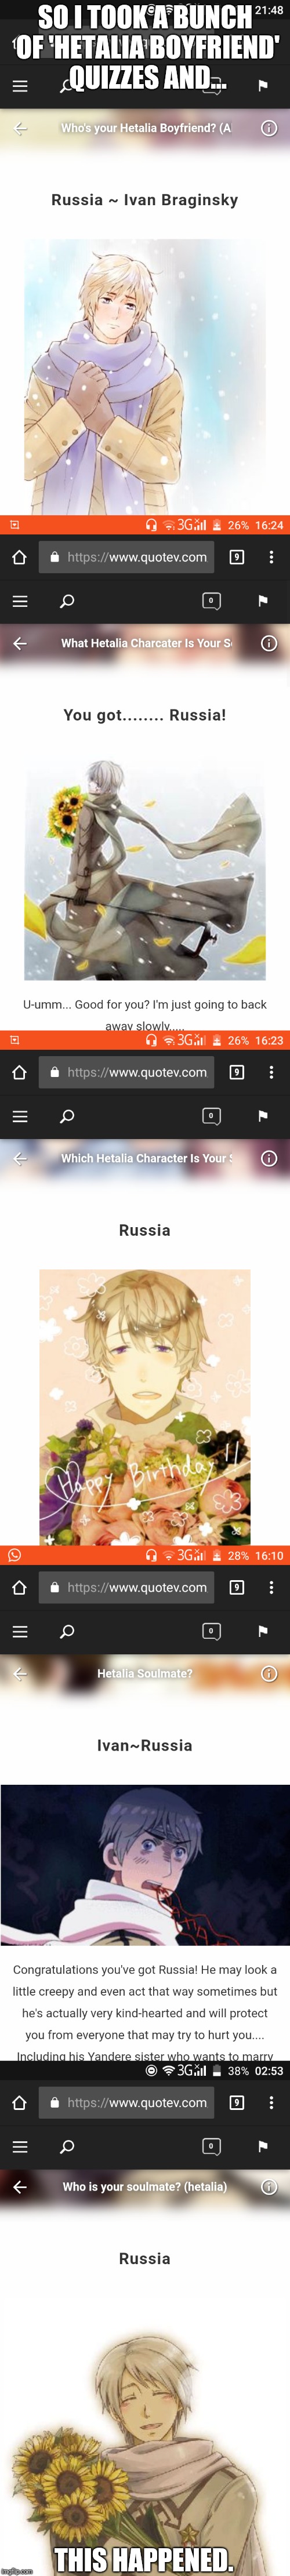 SO I TOOK A BUNCH OF 'HETALIA BOYFRIEND' QUIZZES AND... THIS HAPPENED. | made w/ Imgflip meme maker